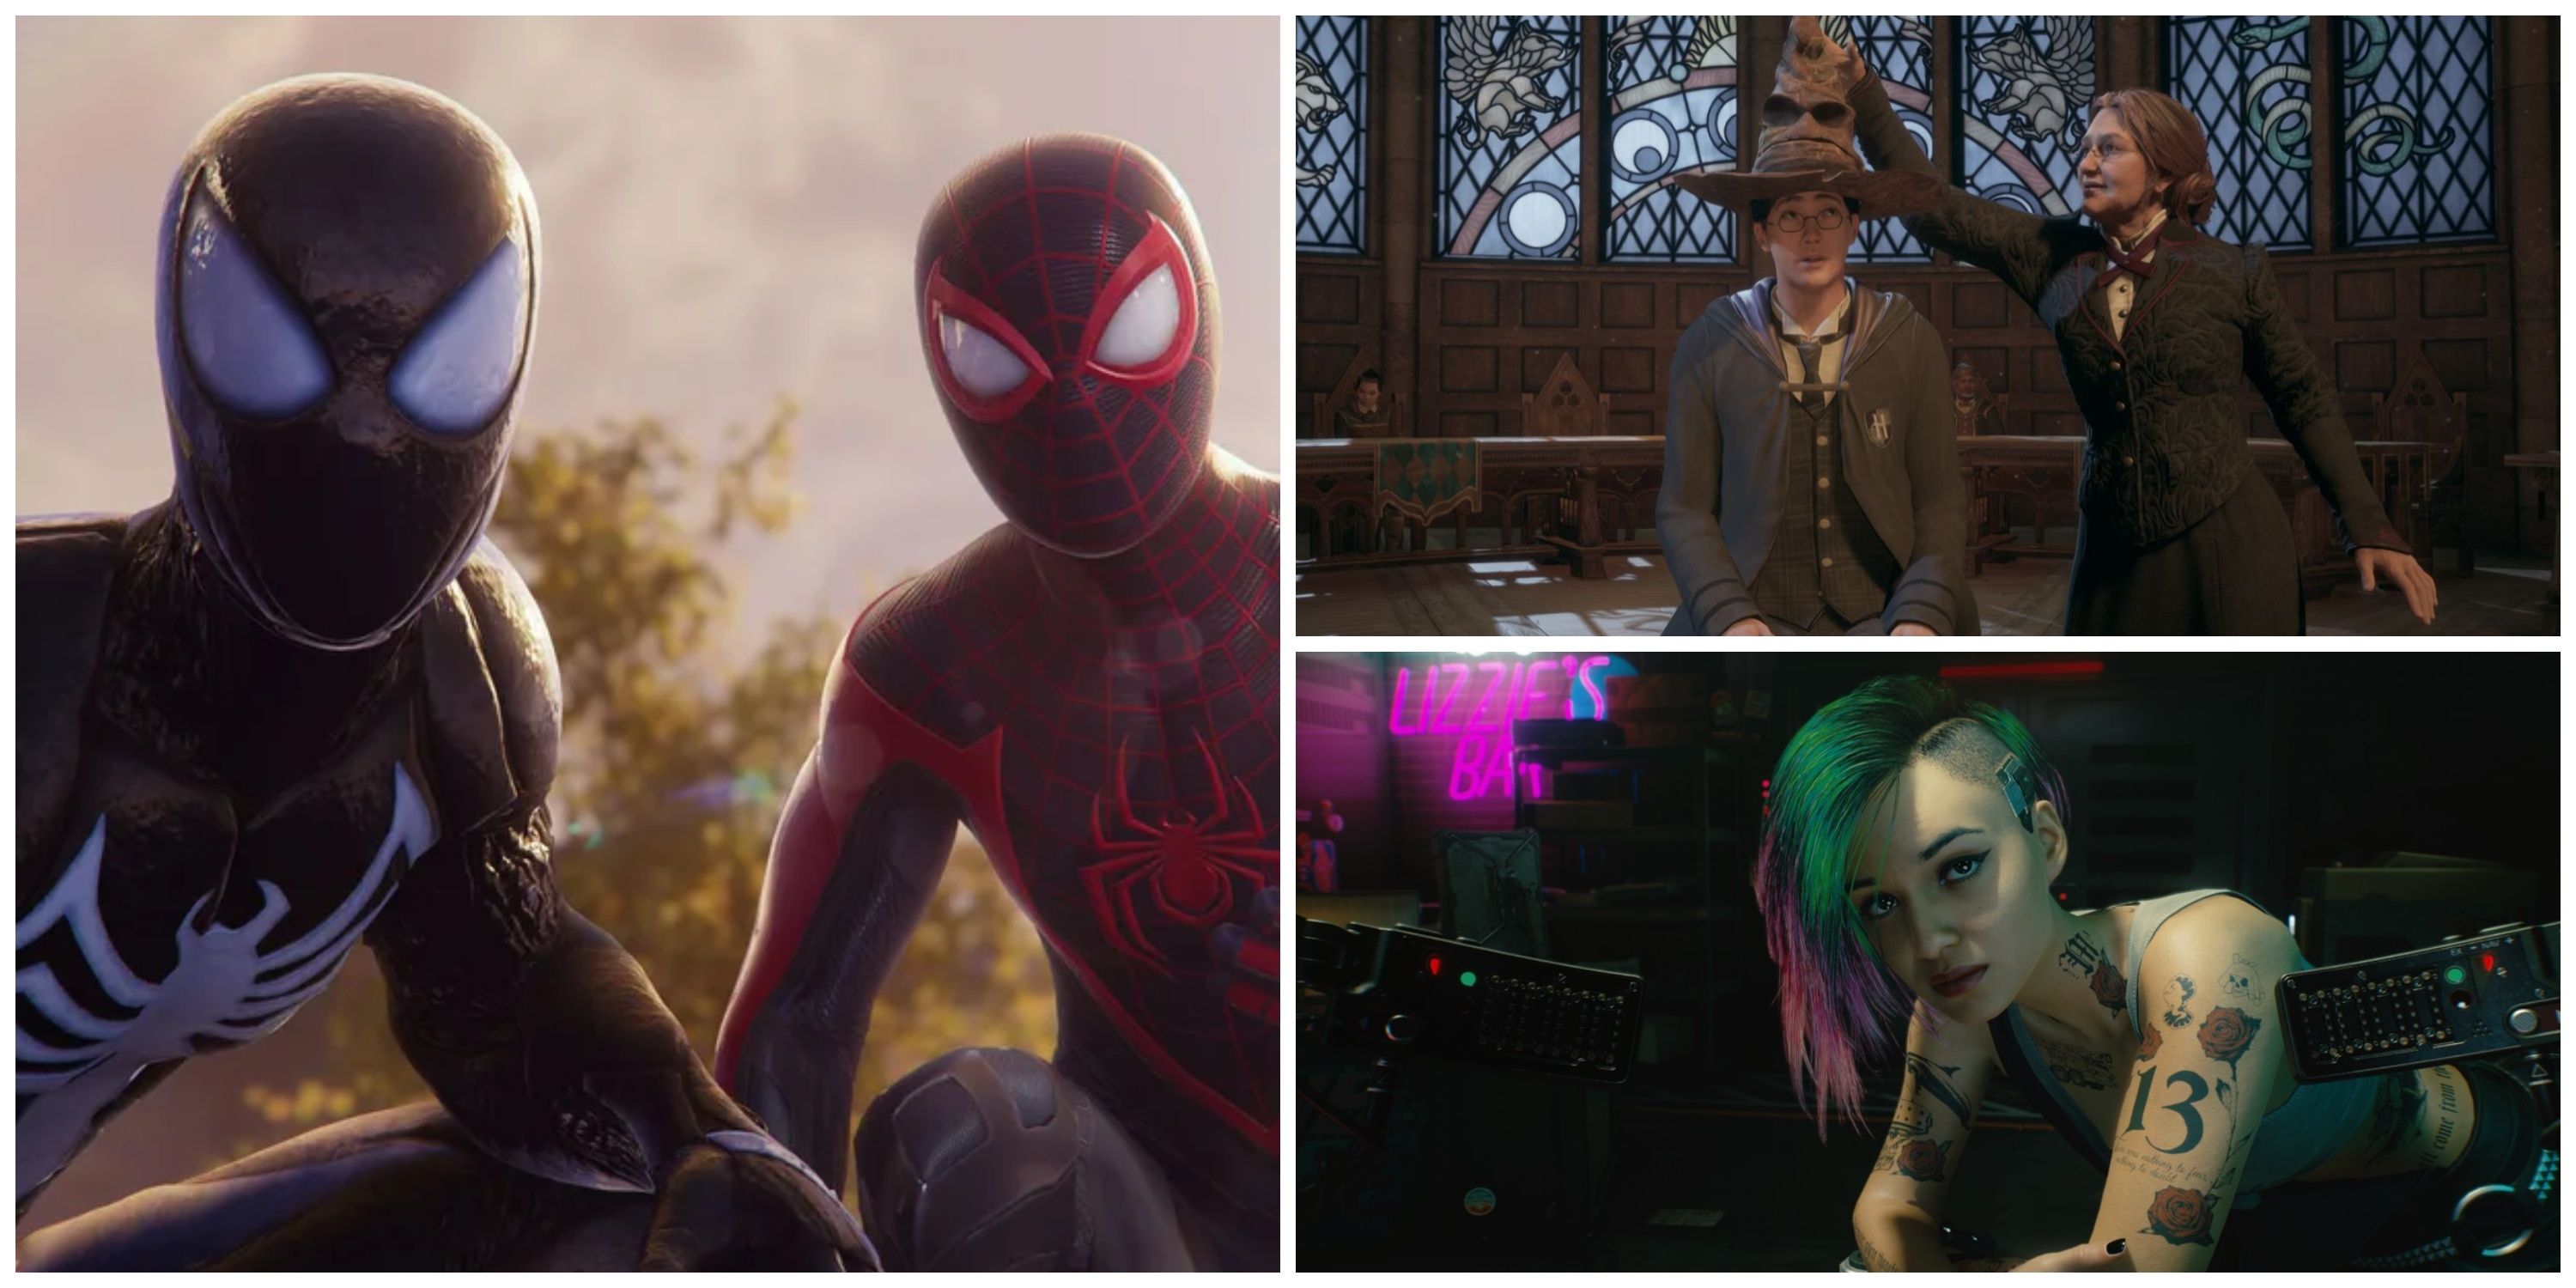 marvel's spider-man 2 symbiote spider-man and miles morales spider-man, hogwarts legacy sorting hat, cyberpunk 2077 judy